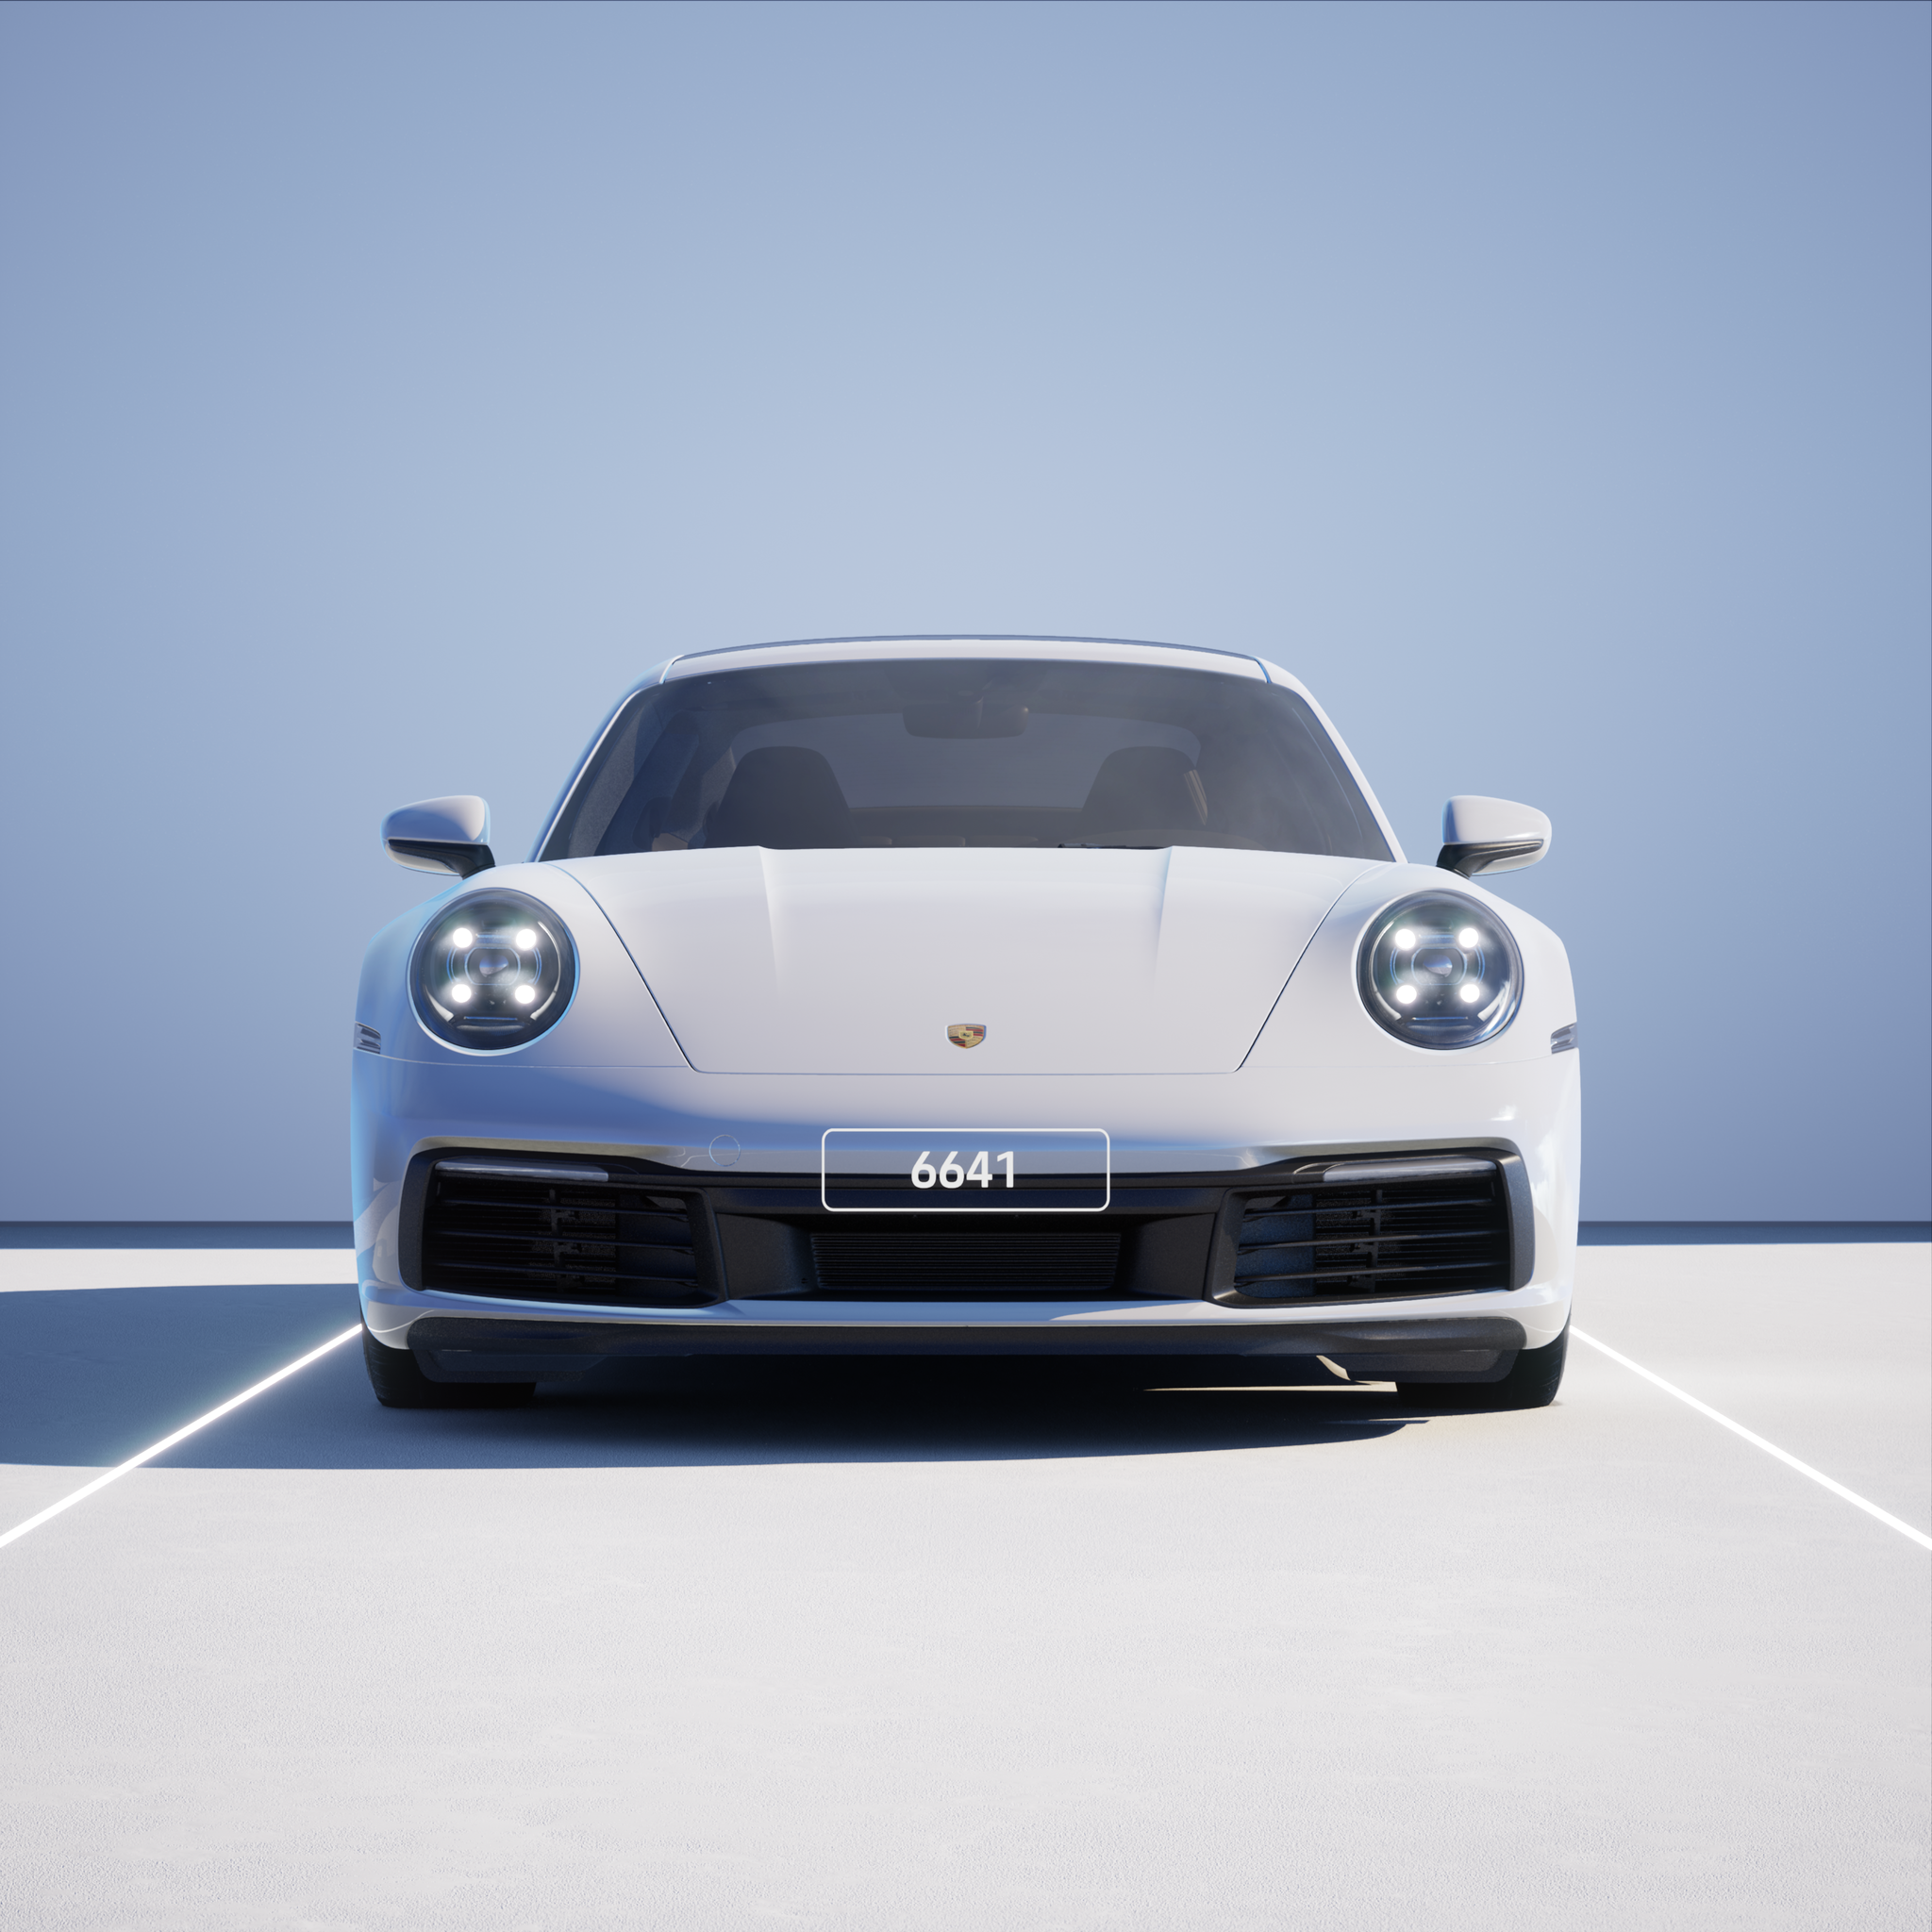 The PORSCHΞ 911 6641 image in phase